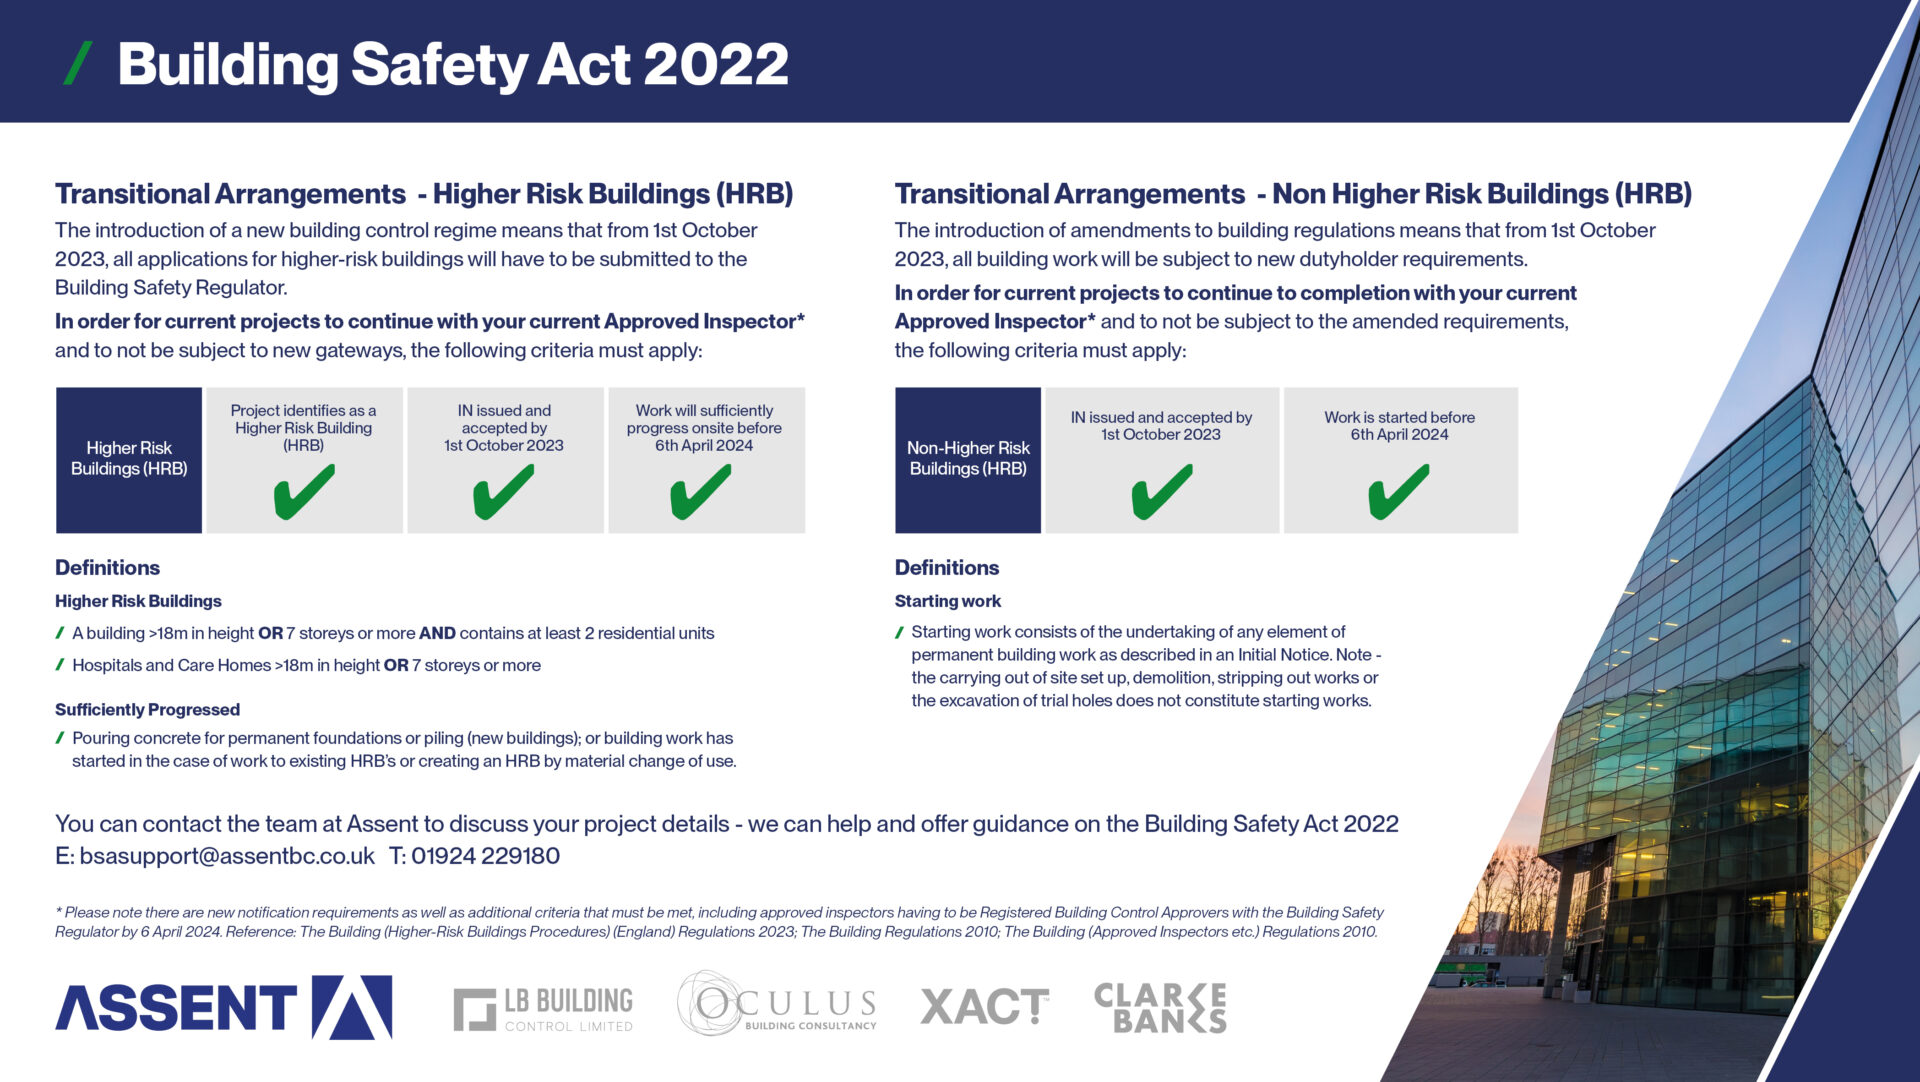 Transitional Arrangements Under The Building Safety Act